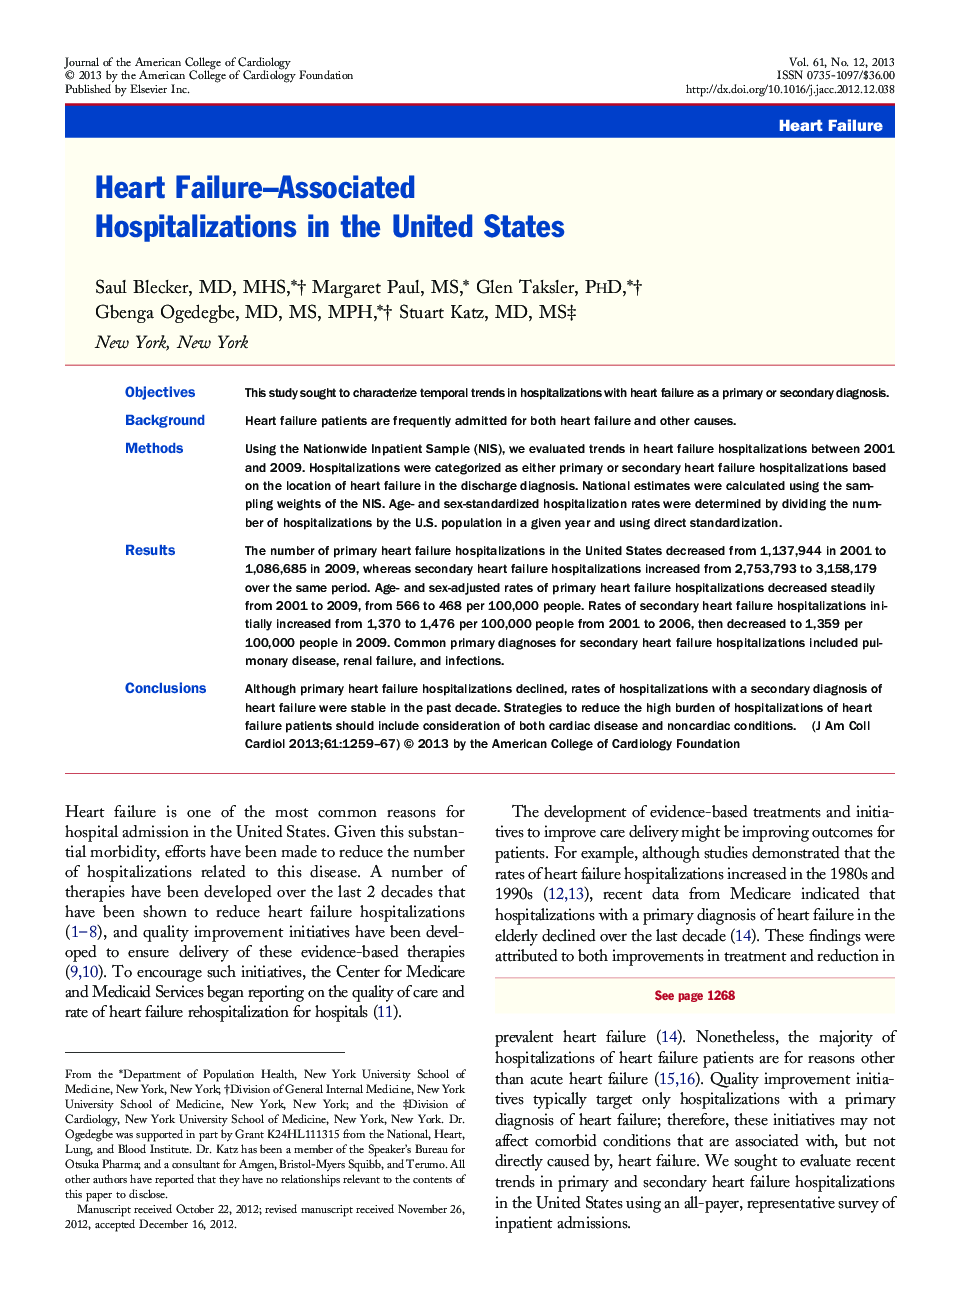 Heart Failure–Associated Hospitalizations in the United States 